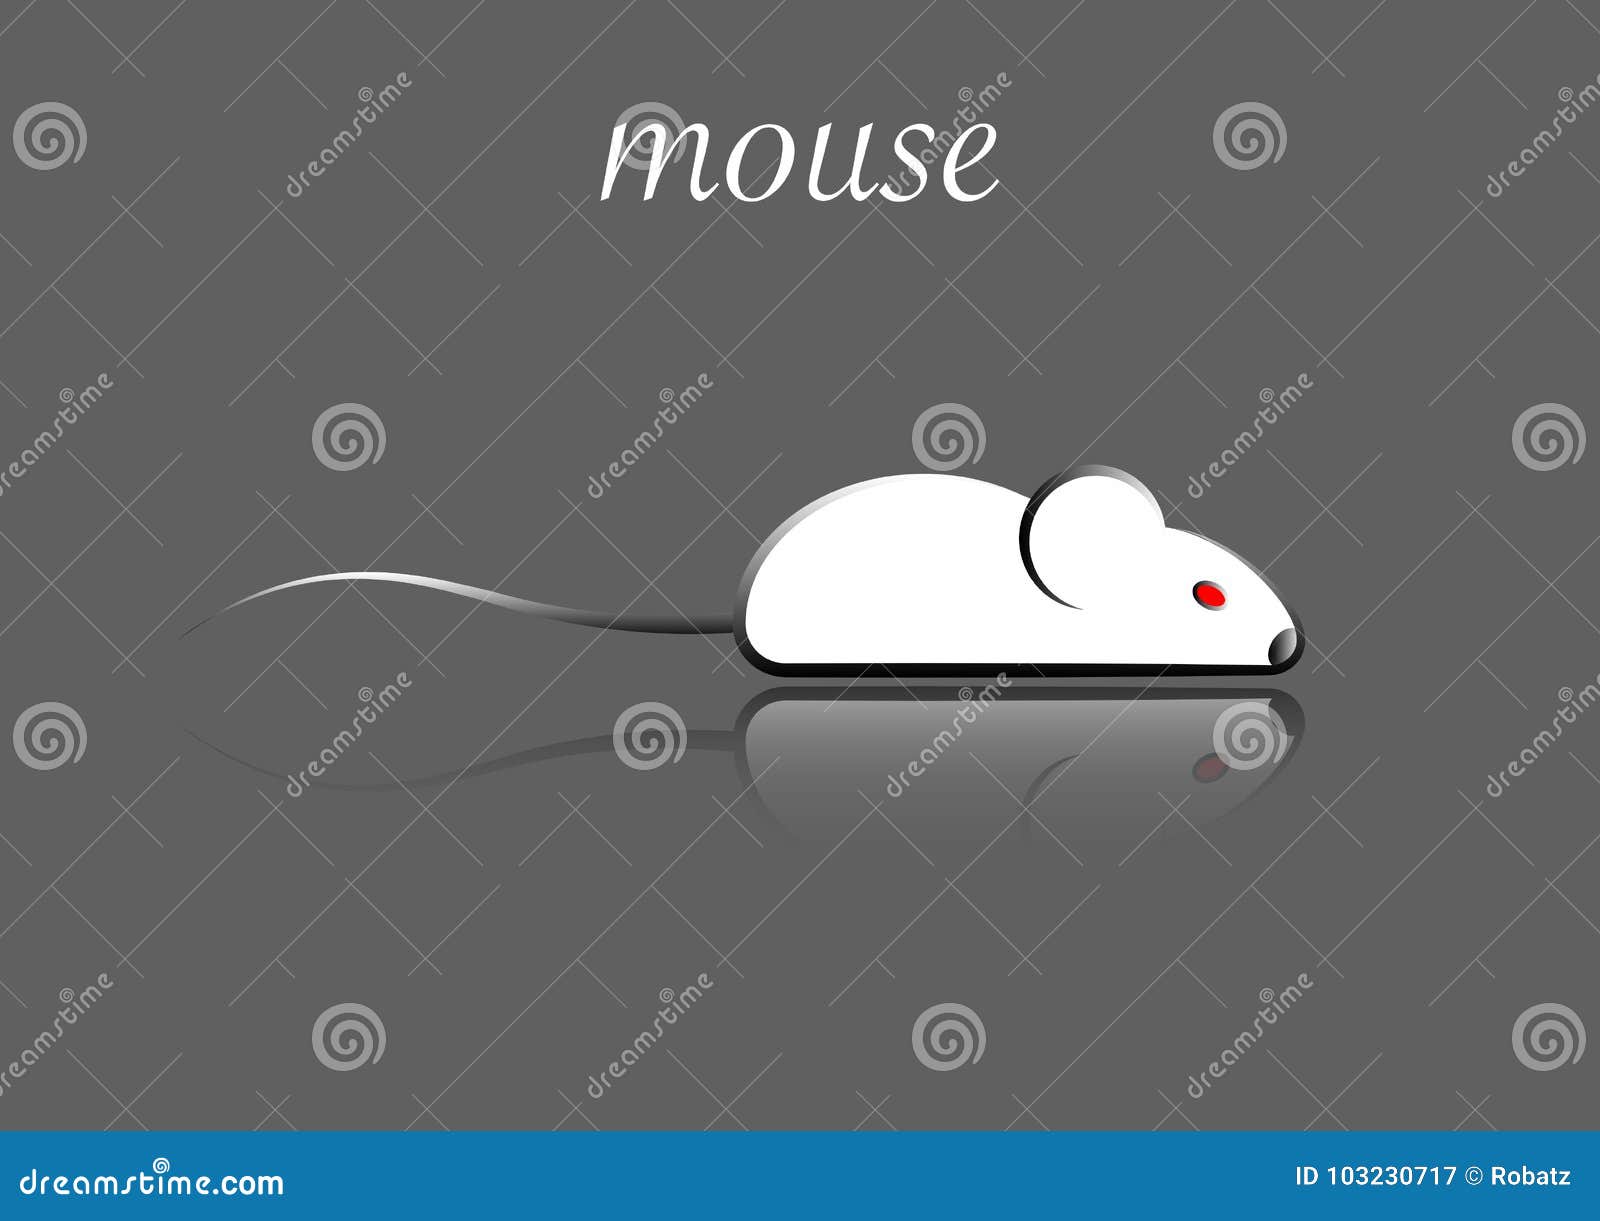 stylish icon of a white mouse icone for background and print.